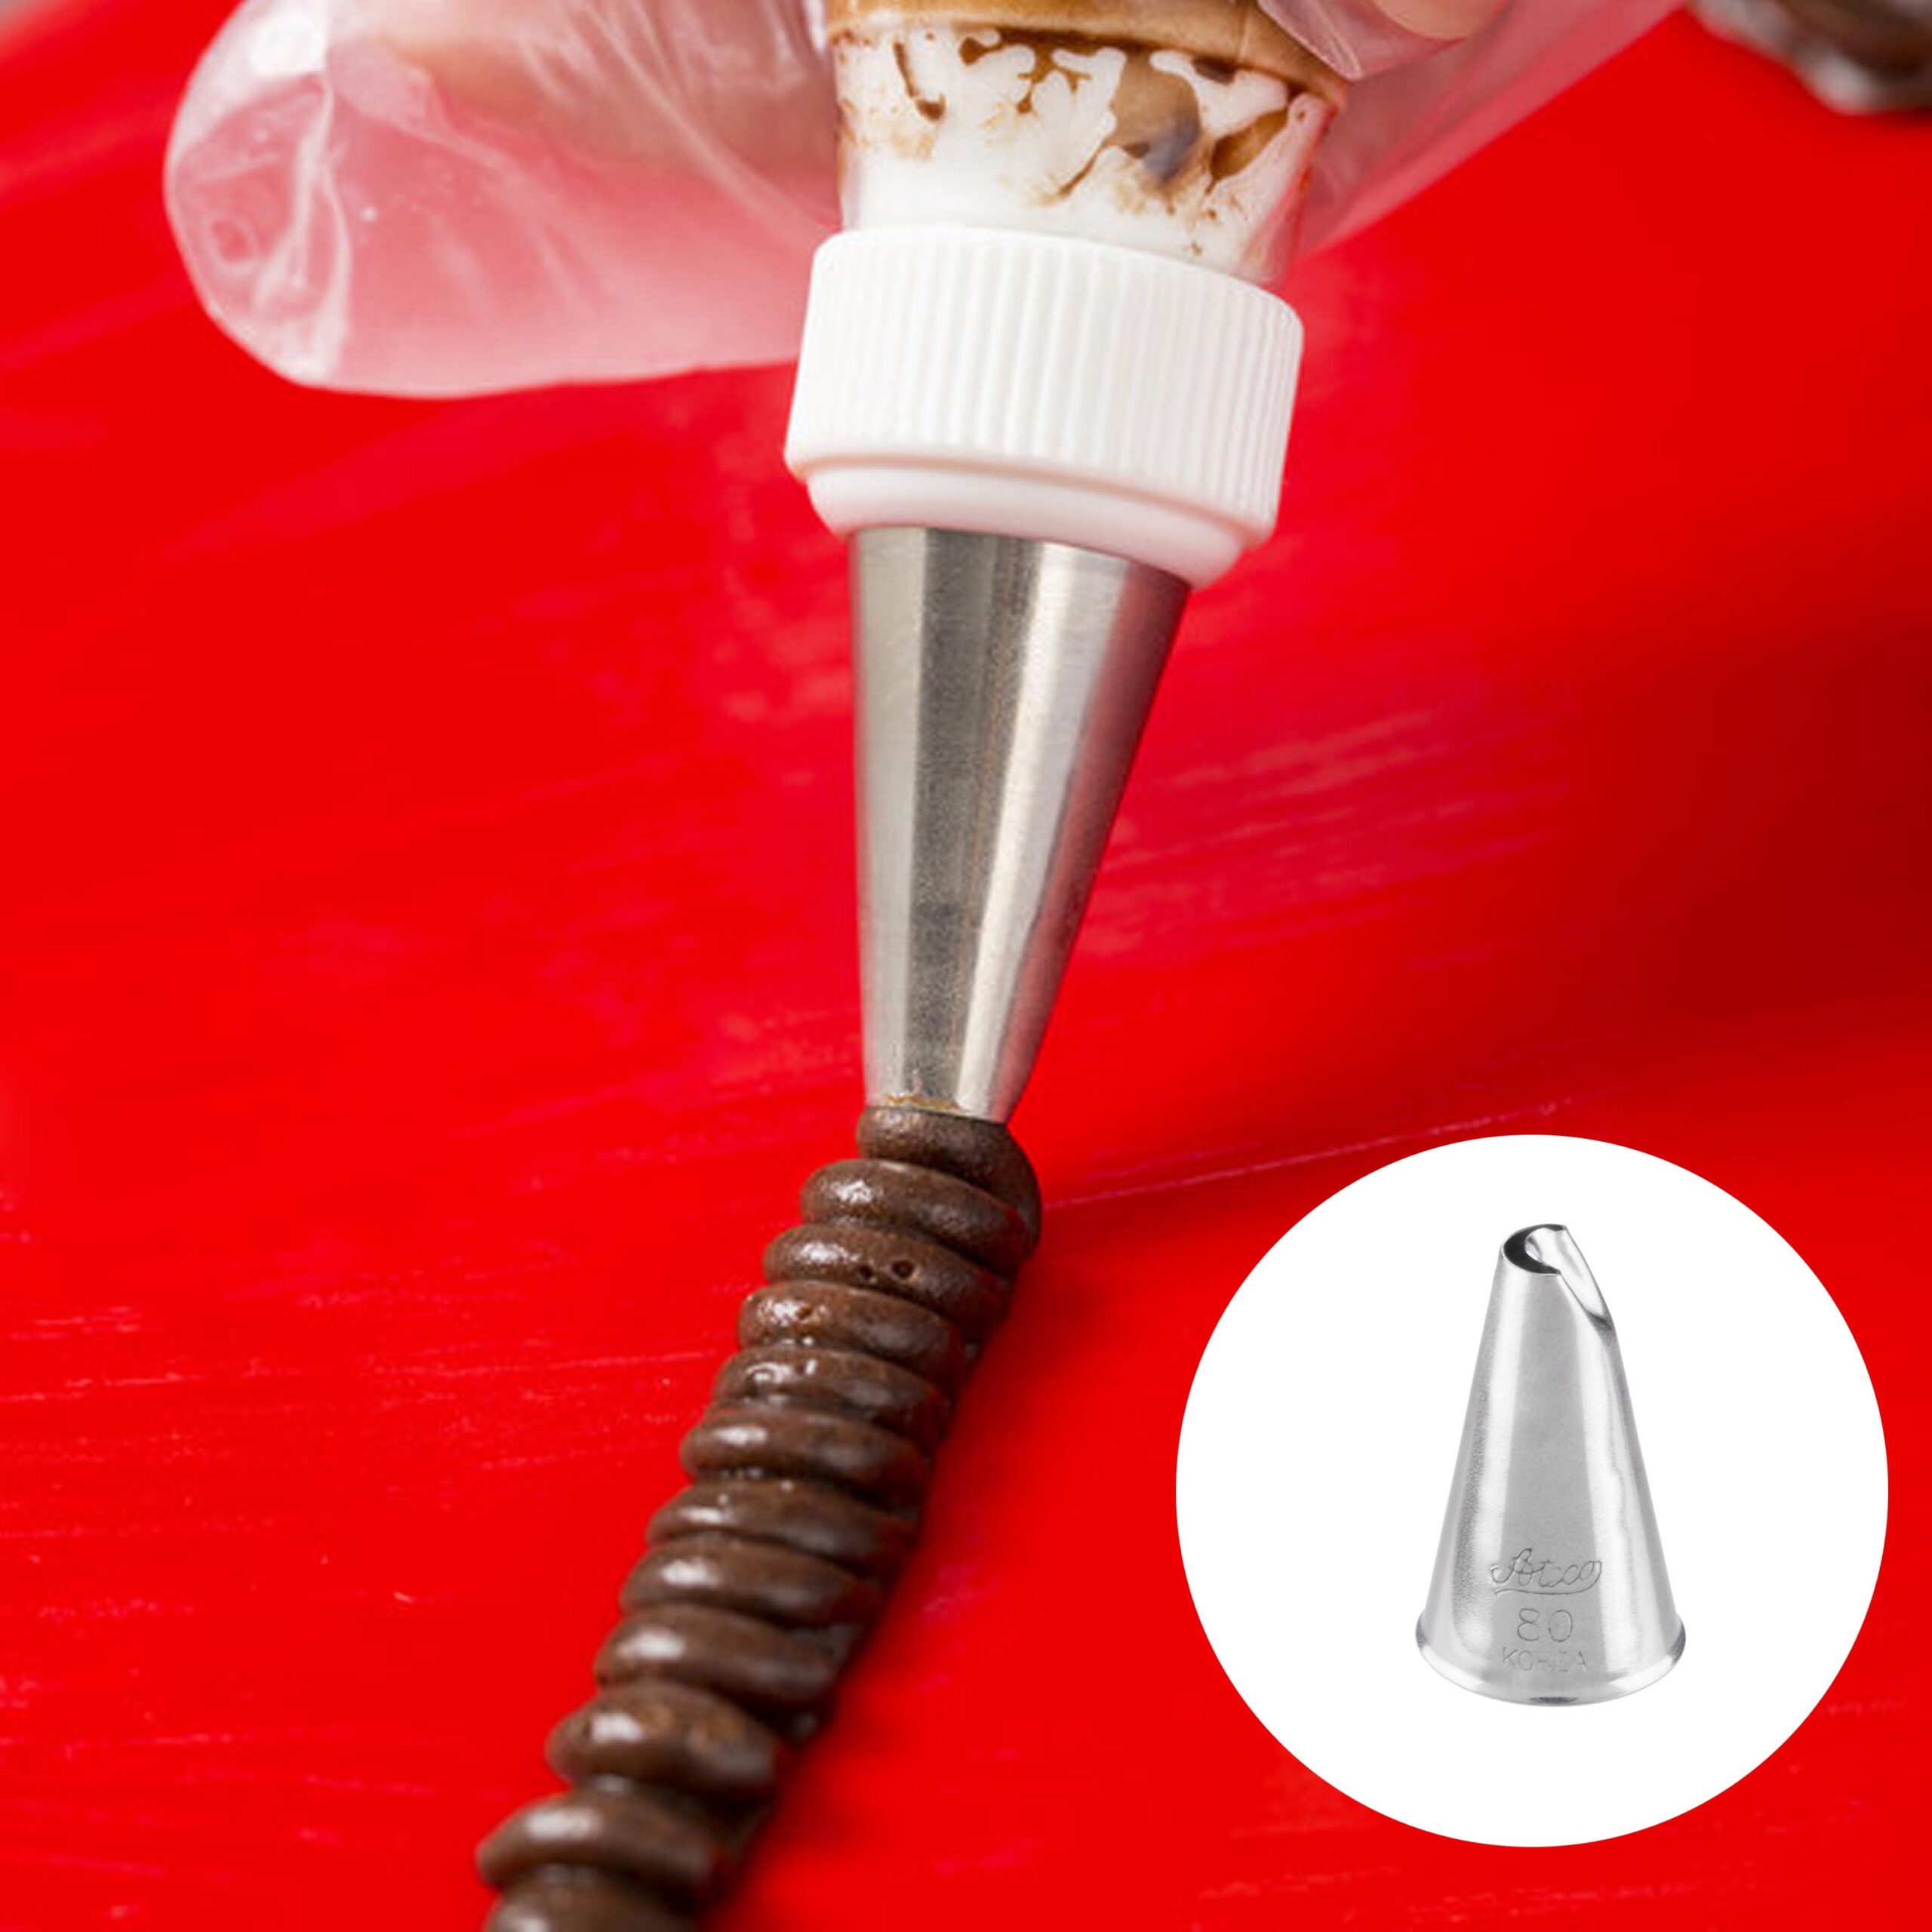 ATECO LILY
NOZZLE -80 LILY
STAINLESS STEEL